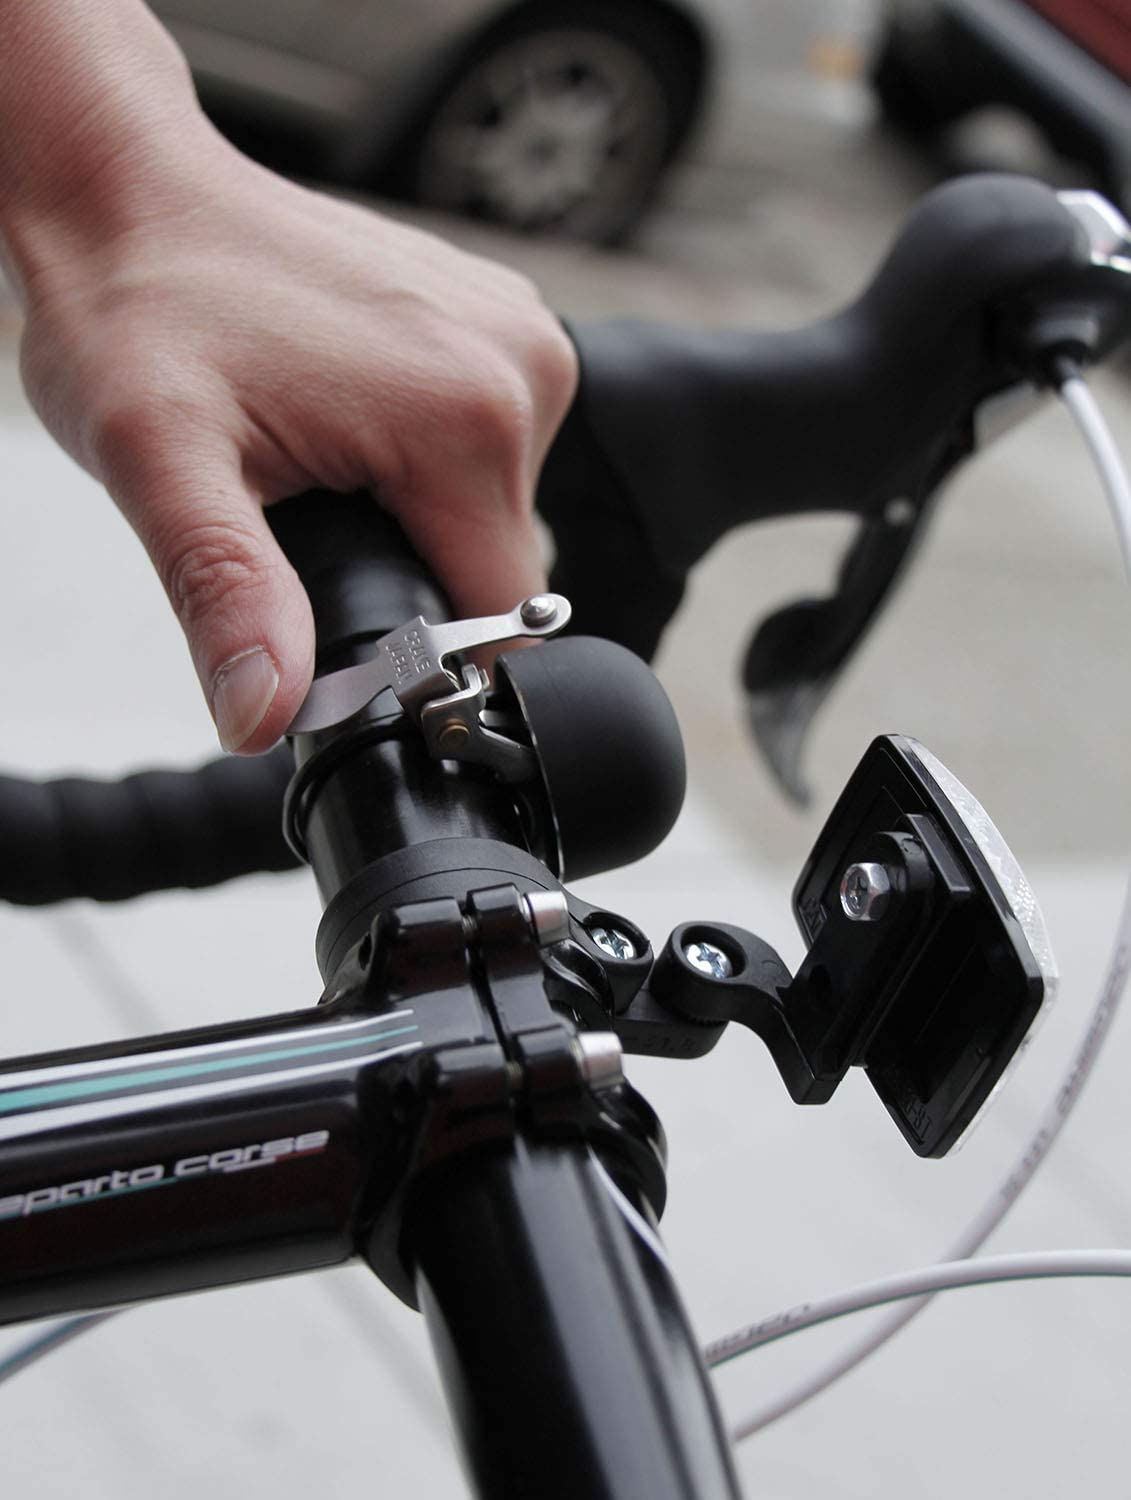 Review: Crane E-Ne Bicycle Bell. Best bike bell on the market?